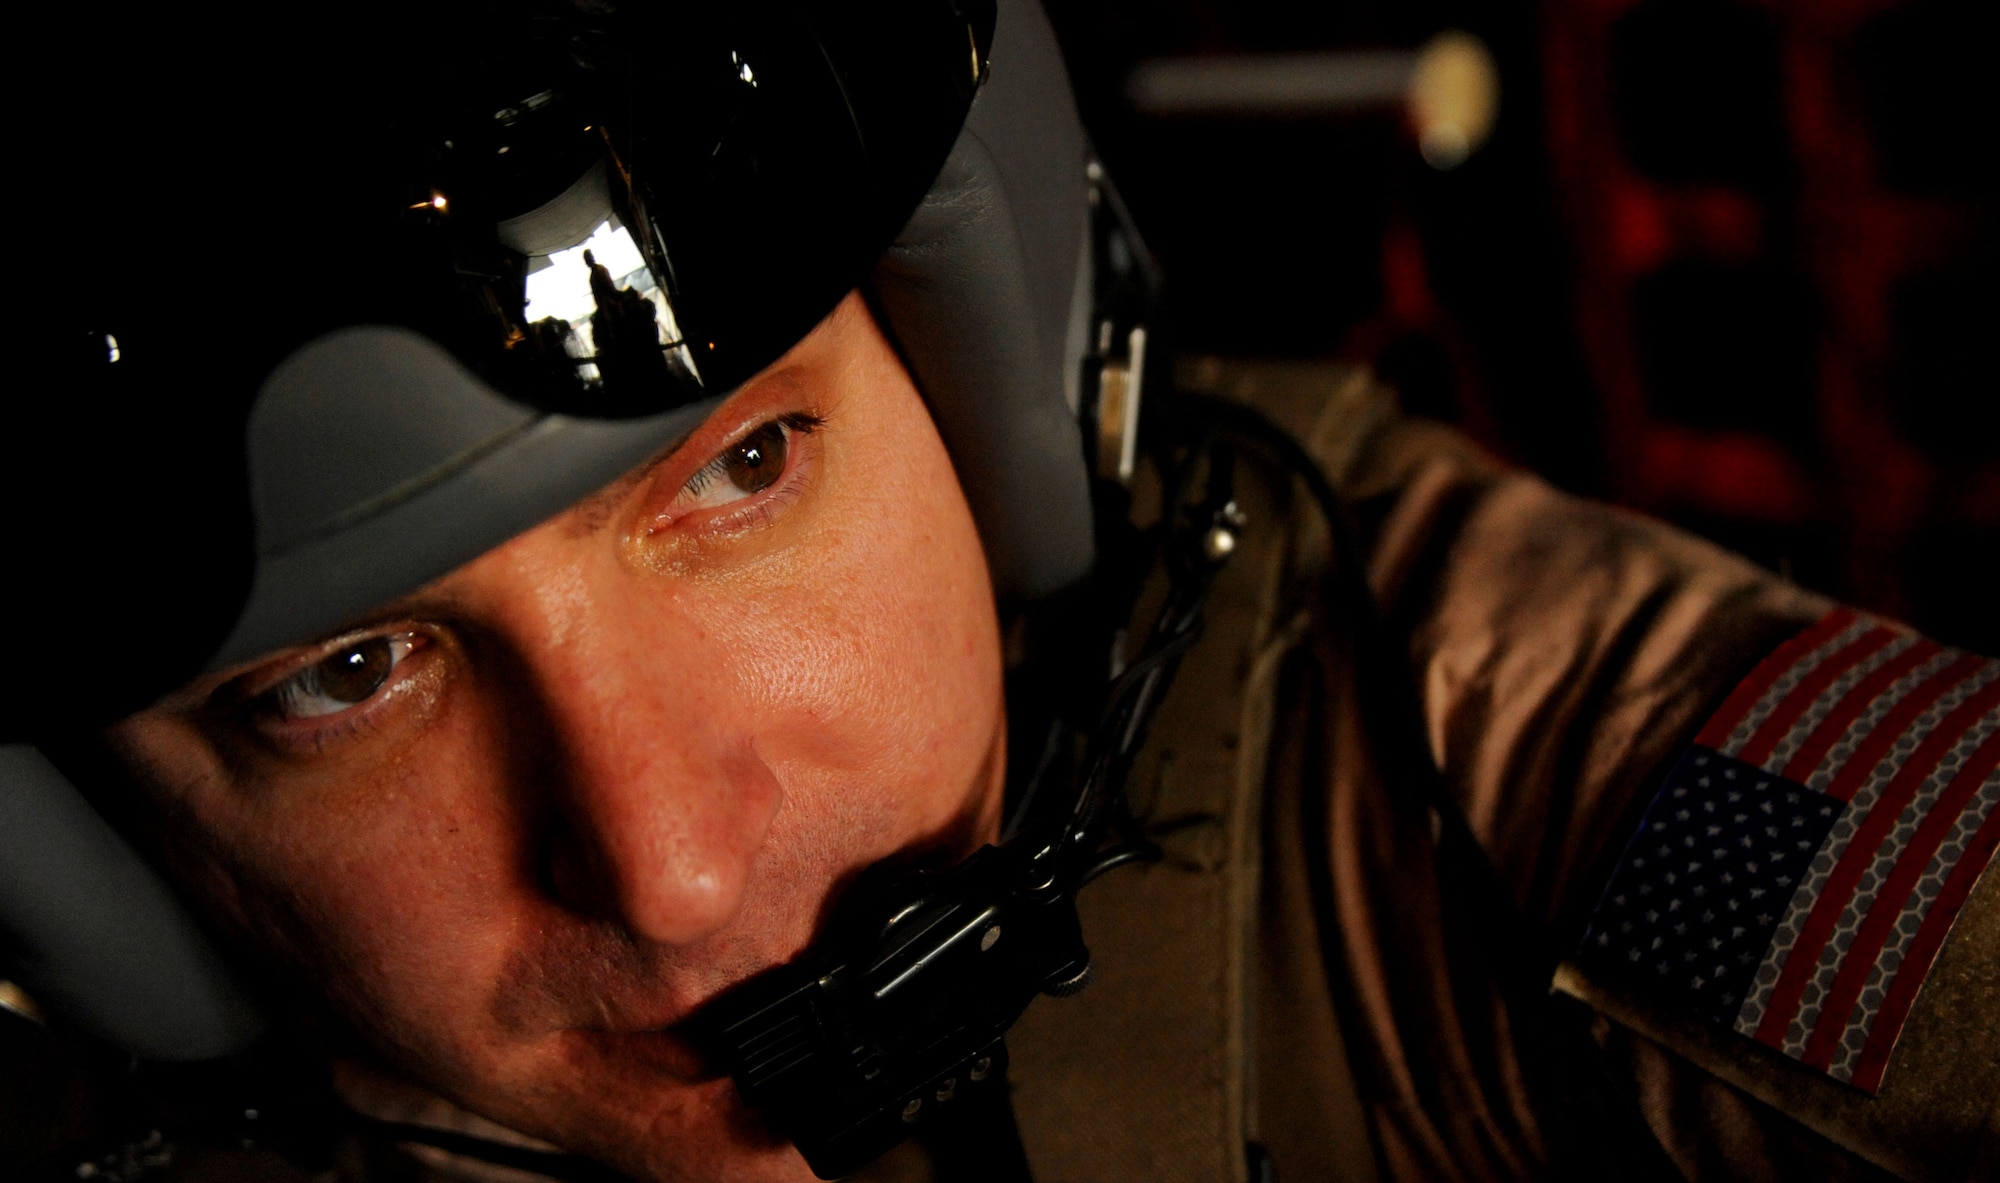 U.S. Air Force Tech. Sgt. Brian Miliefsky, loadmaster, 774th Expeditionary Airlift Squadron, deployed to Bagram Airfield, Afghanistan, watches as other loadmasters prepare for take-off on a C-130H Hercules, Feb. 6, 2010. This mission marked the first time an Air Force C-130 crew utilized low-cost low-altitude bundles in a combat zone.  (U.S. Air Force photo/Staff Sgt. Angelita Lawrence/released)
